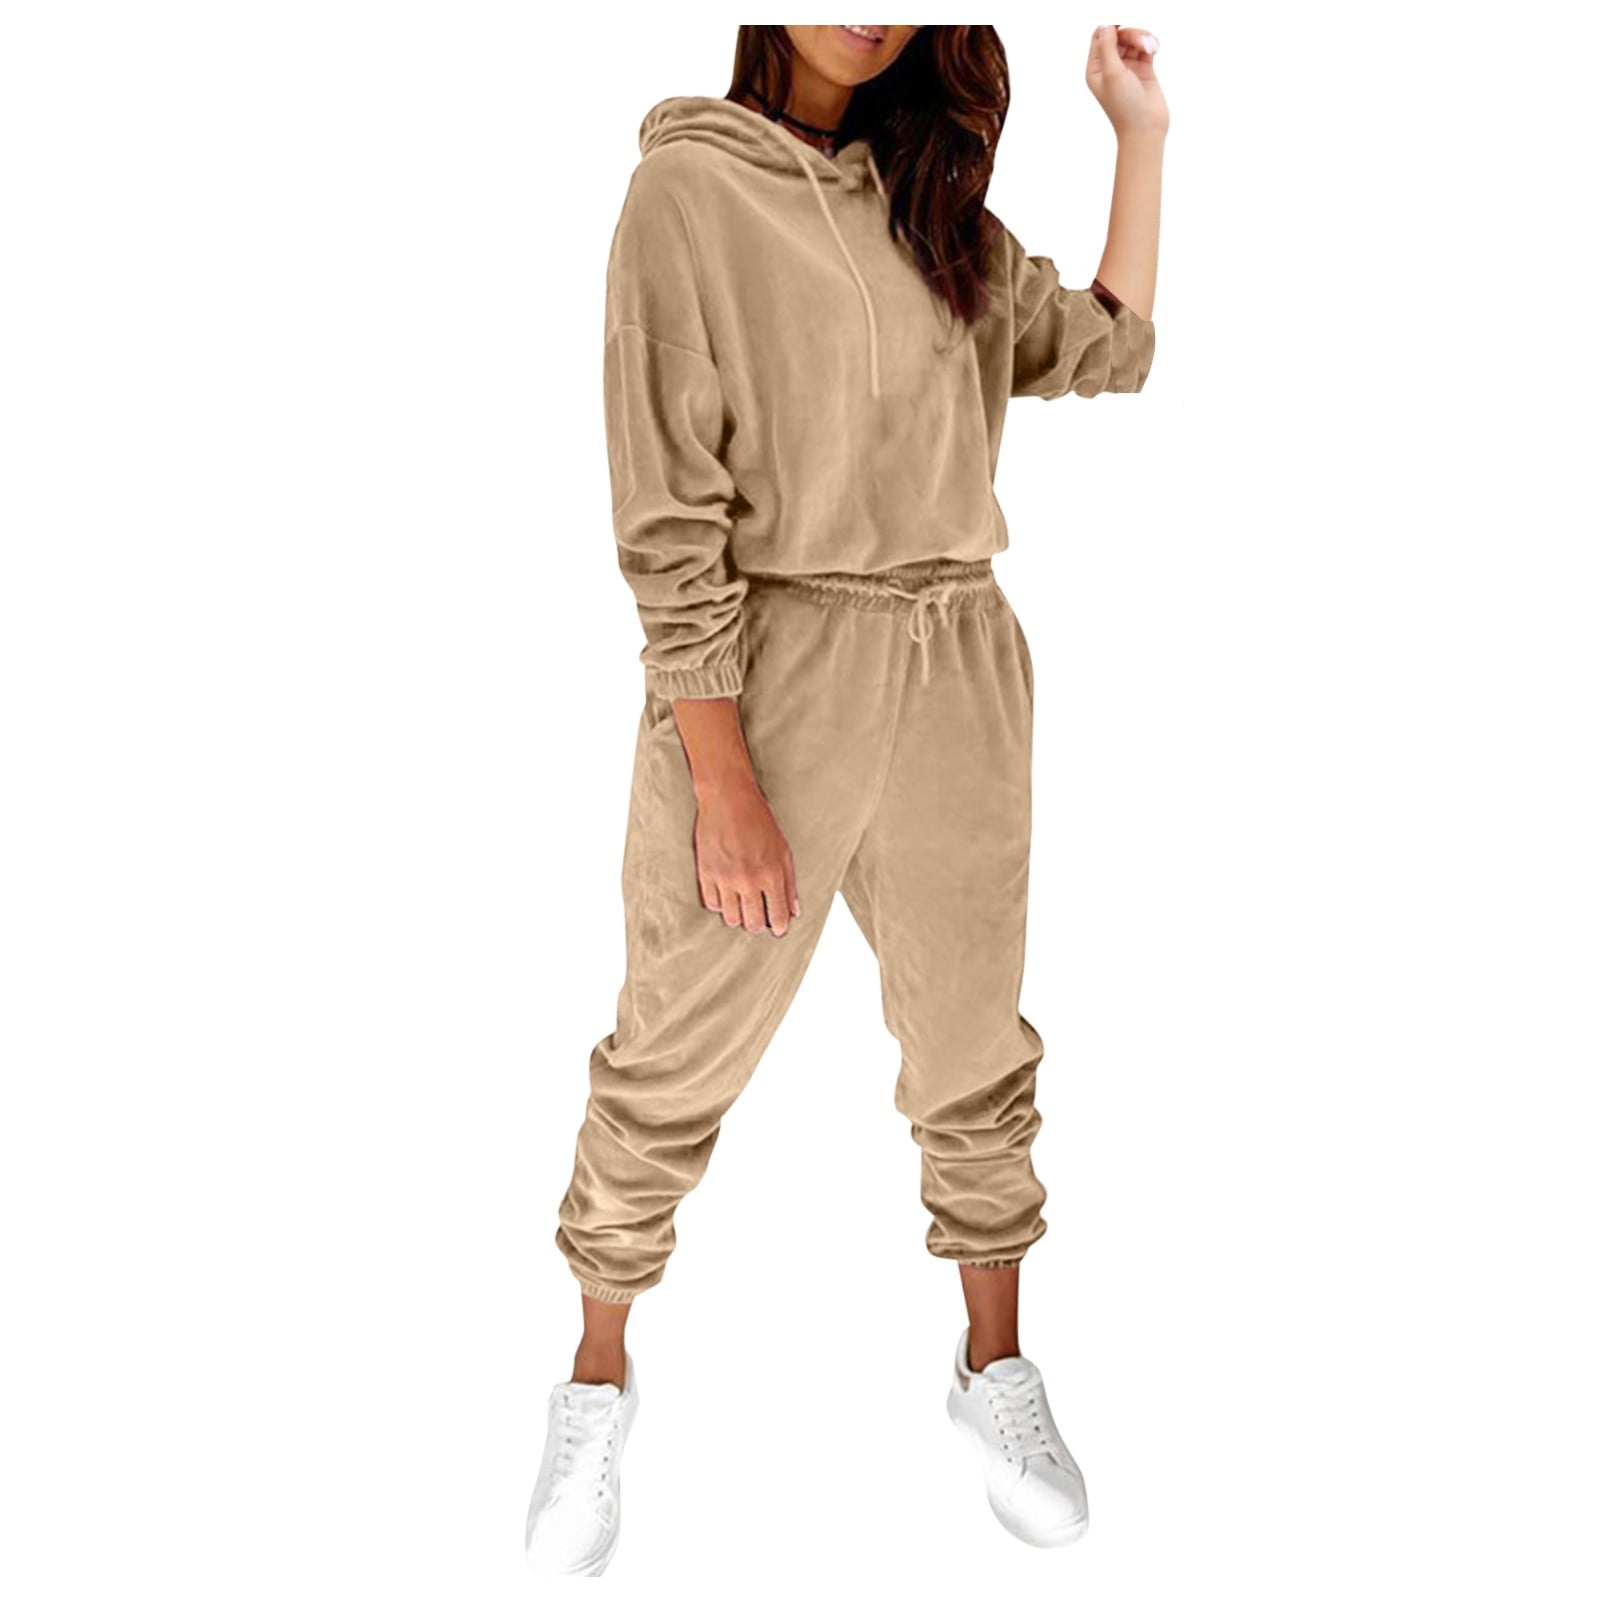 HSMQHJWE Pant Suits For Women Dressy Elegant Pant Suit Women Dressy Formal  Womens Color Block 2 Piece Outfit Hooded Sweatshirt Sweatpants Long Sleeve  Hooded Collar Tops And Long Pants Tracksuit Sweat 